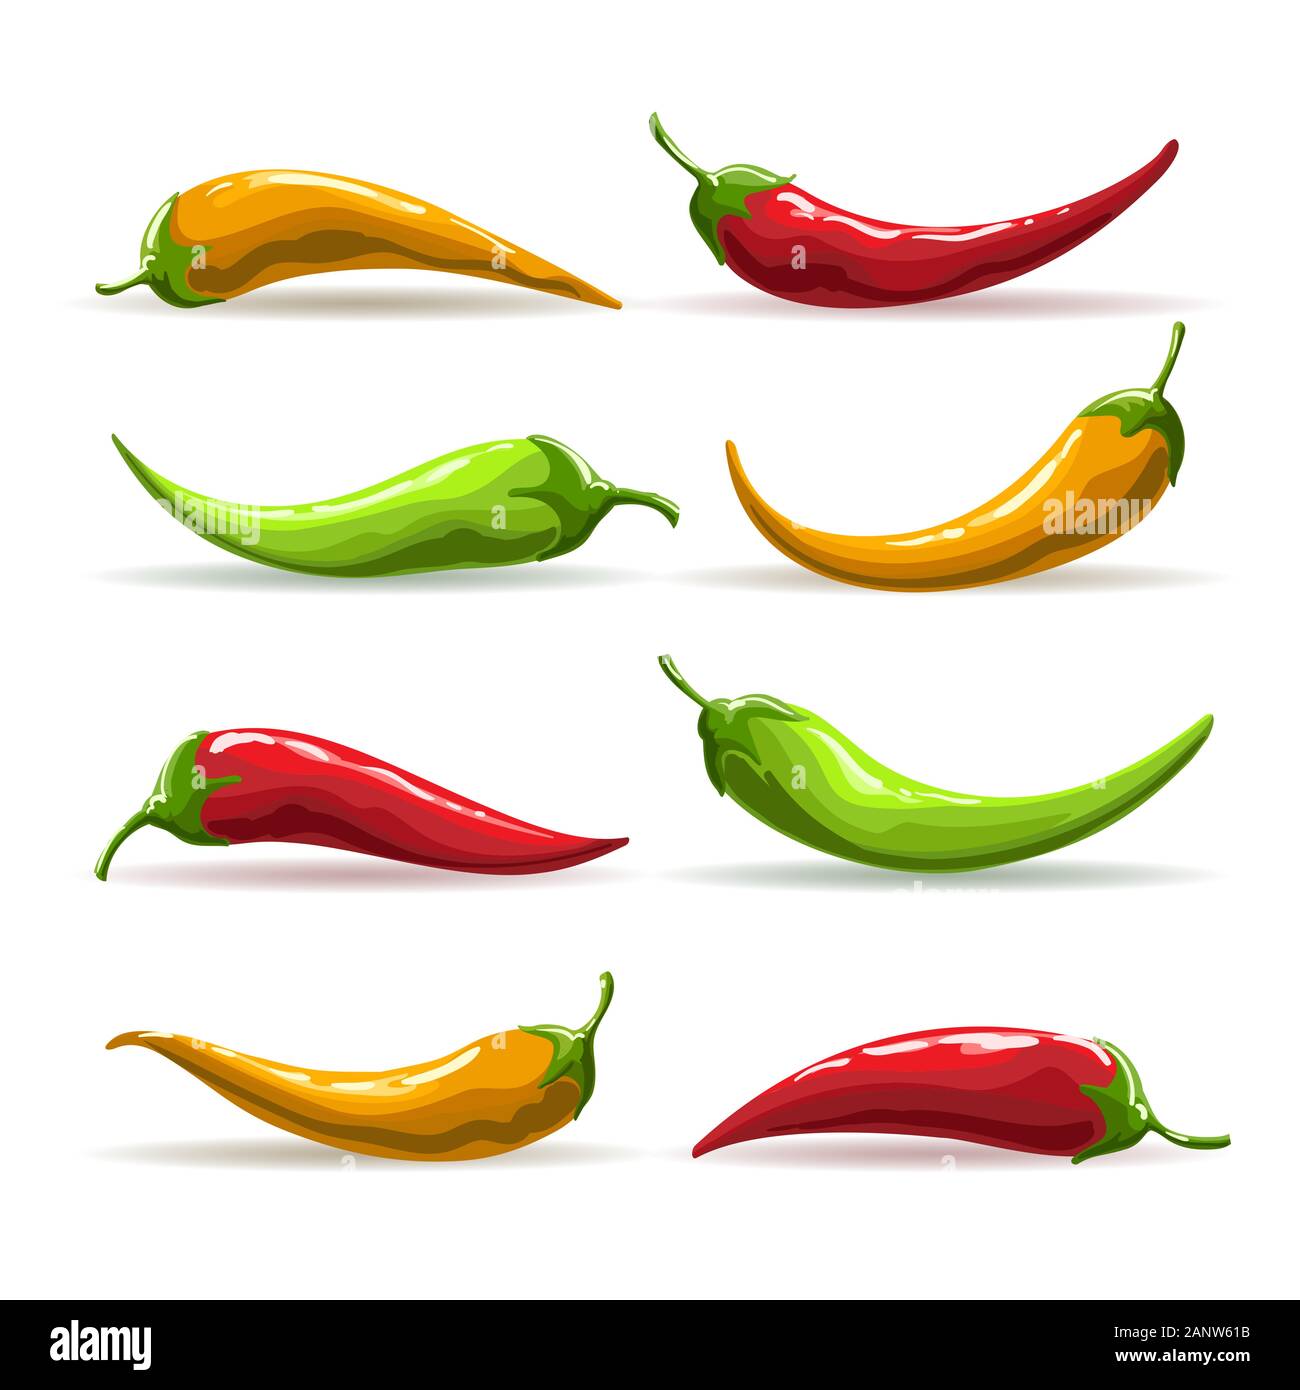 Red, yellow and green chili peppers. Hand drawn vector illustration. Stock Vector